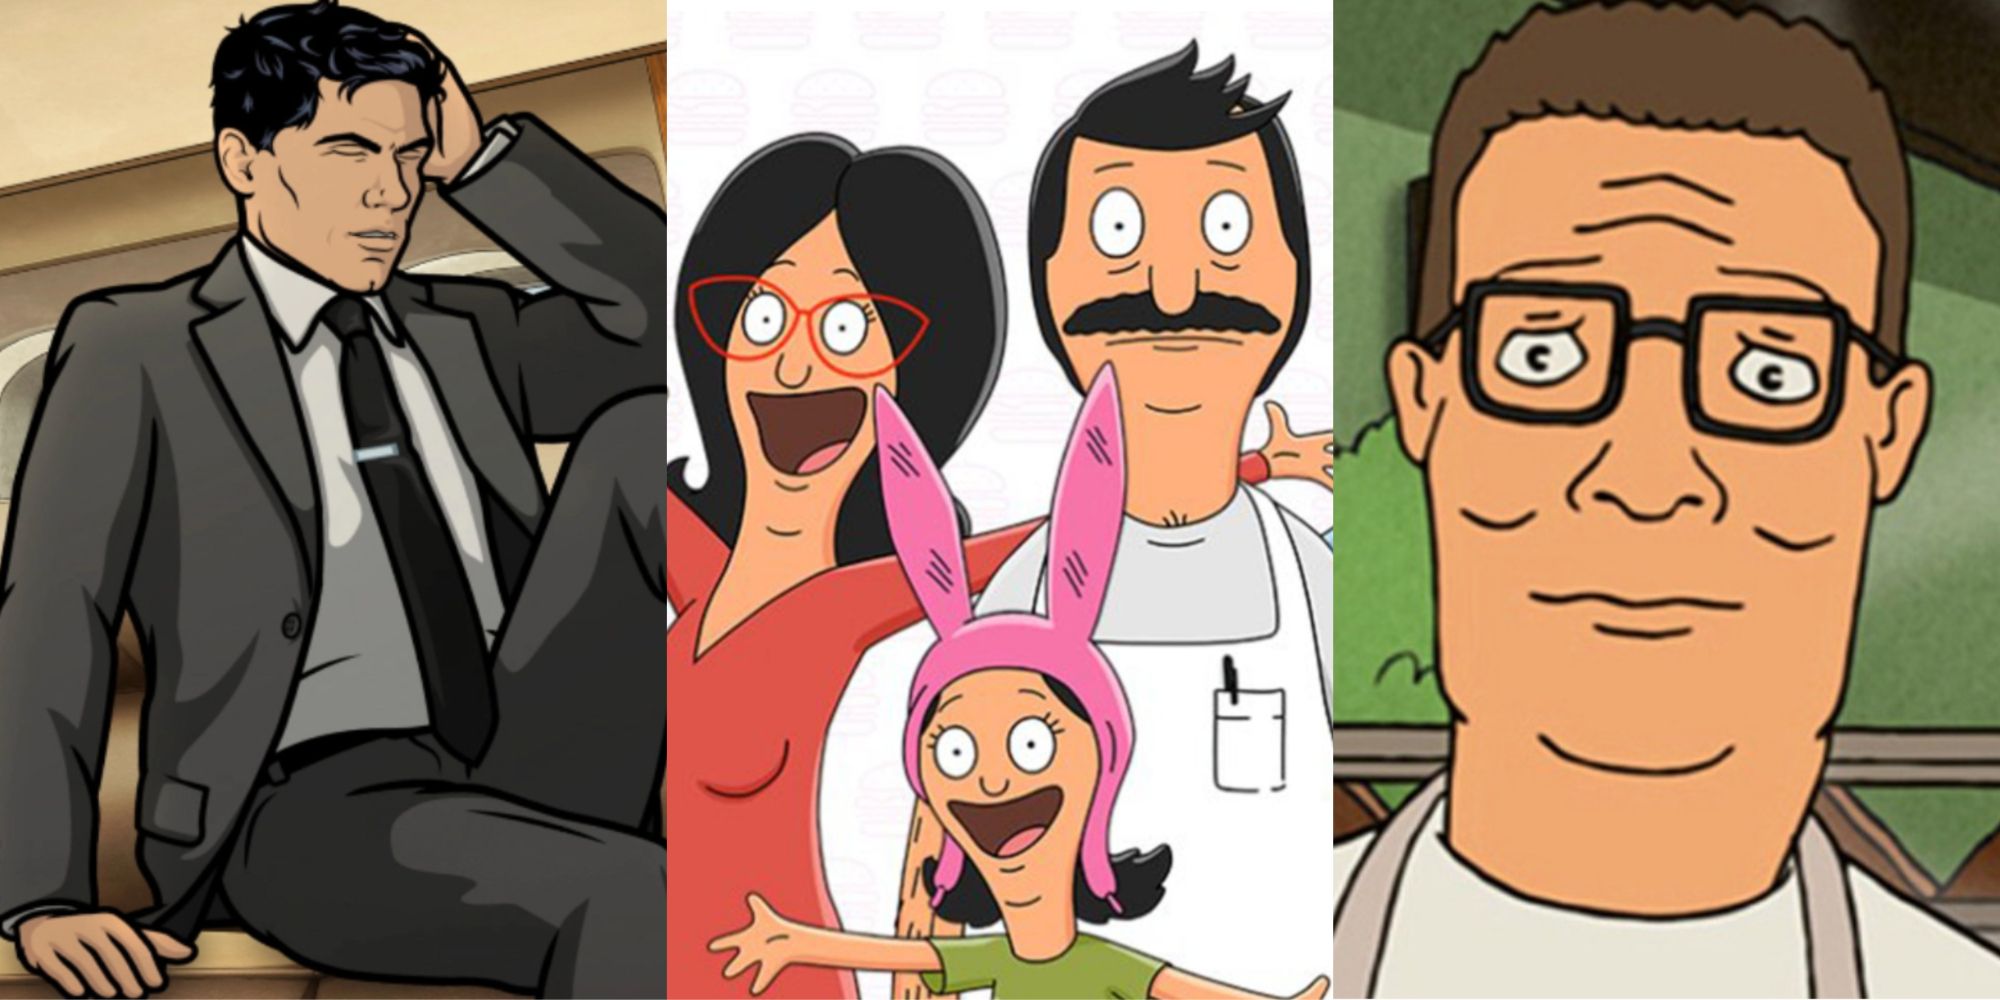 Split image of main characters from Archer, Bob's Burgers and King of the Hill